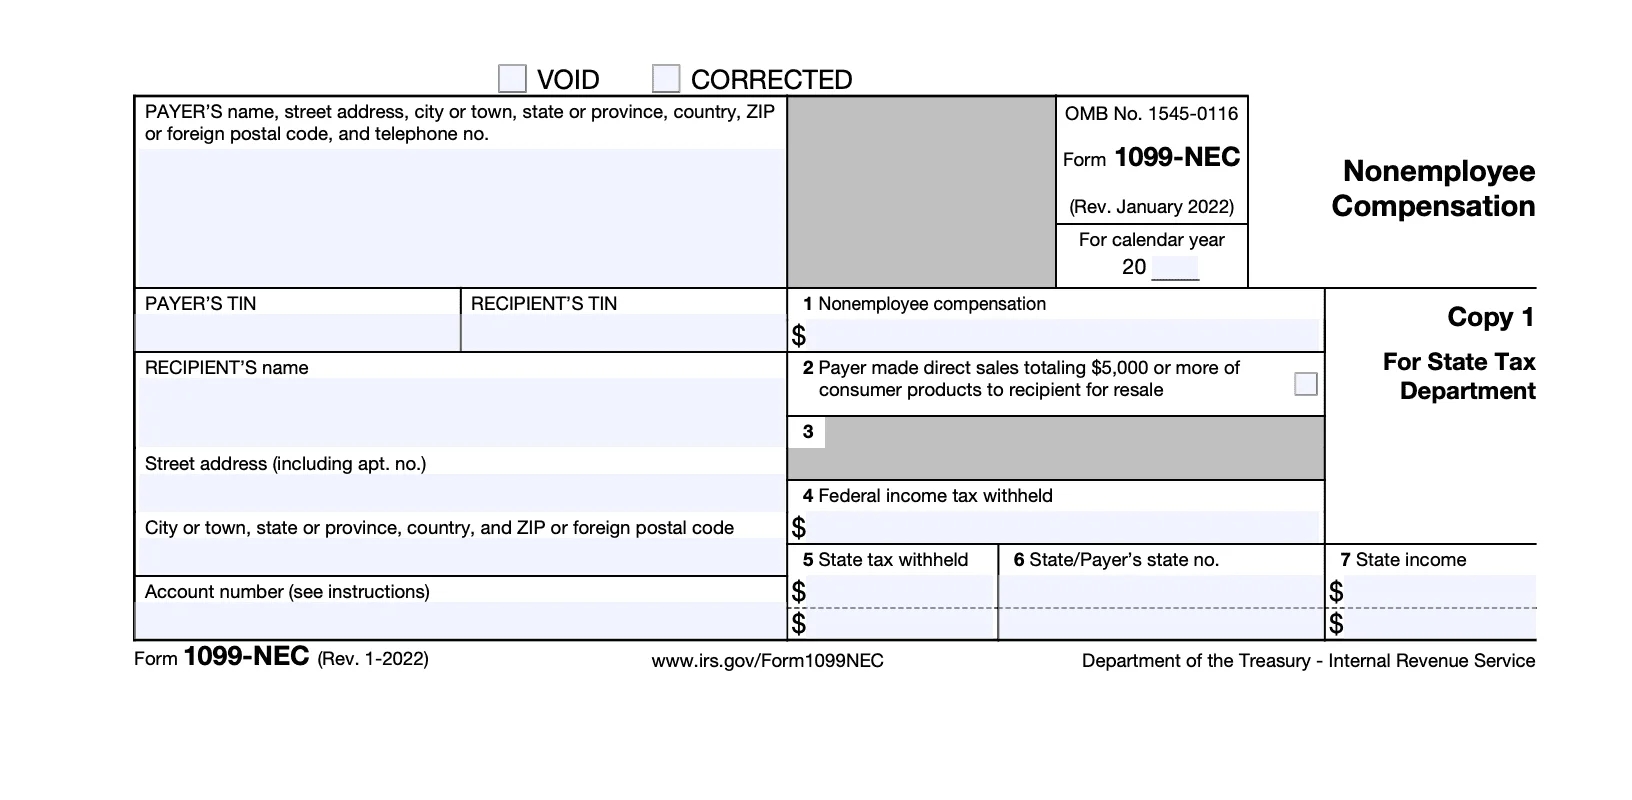 Image of Form 1099-NEC with corrected details for nonemployee compensation, federal and state taxes, and payer and recipient information. Relevant for self-employed, freelancers, and taxes.